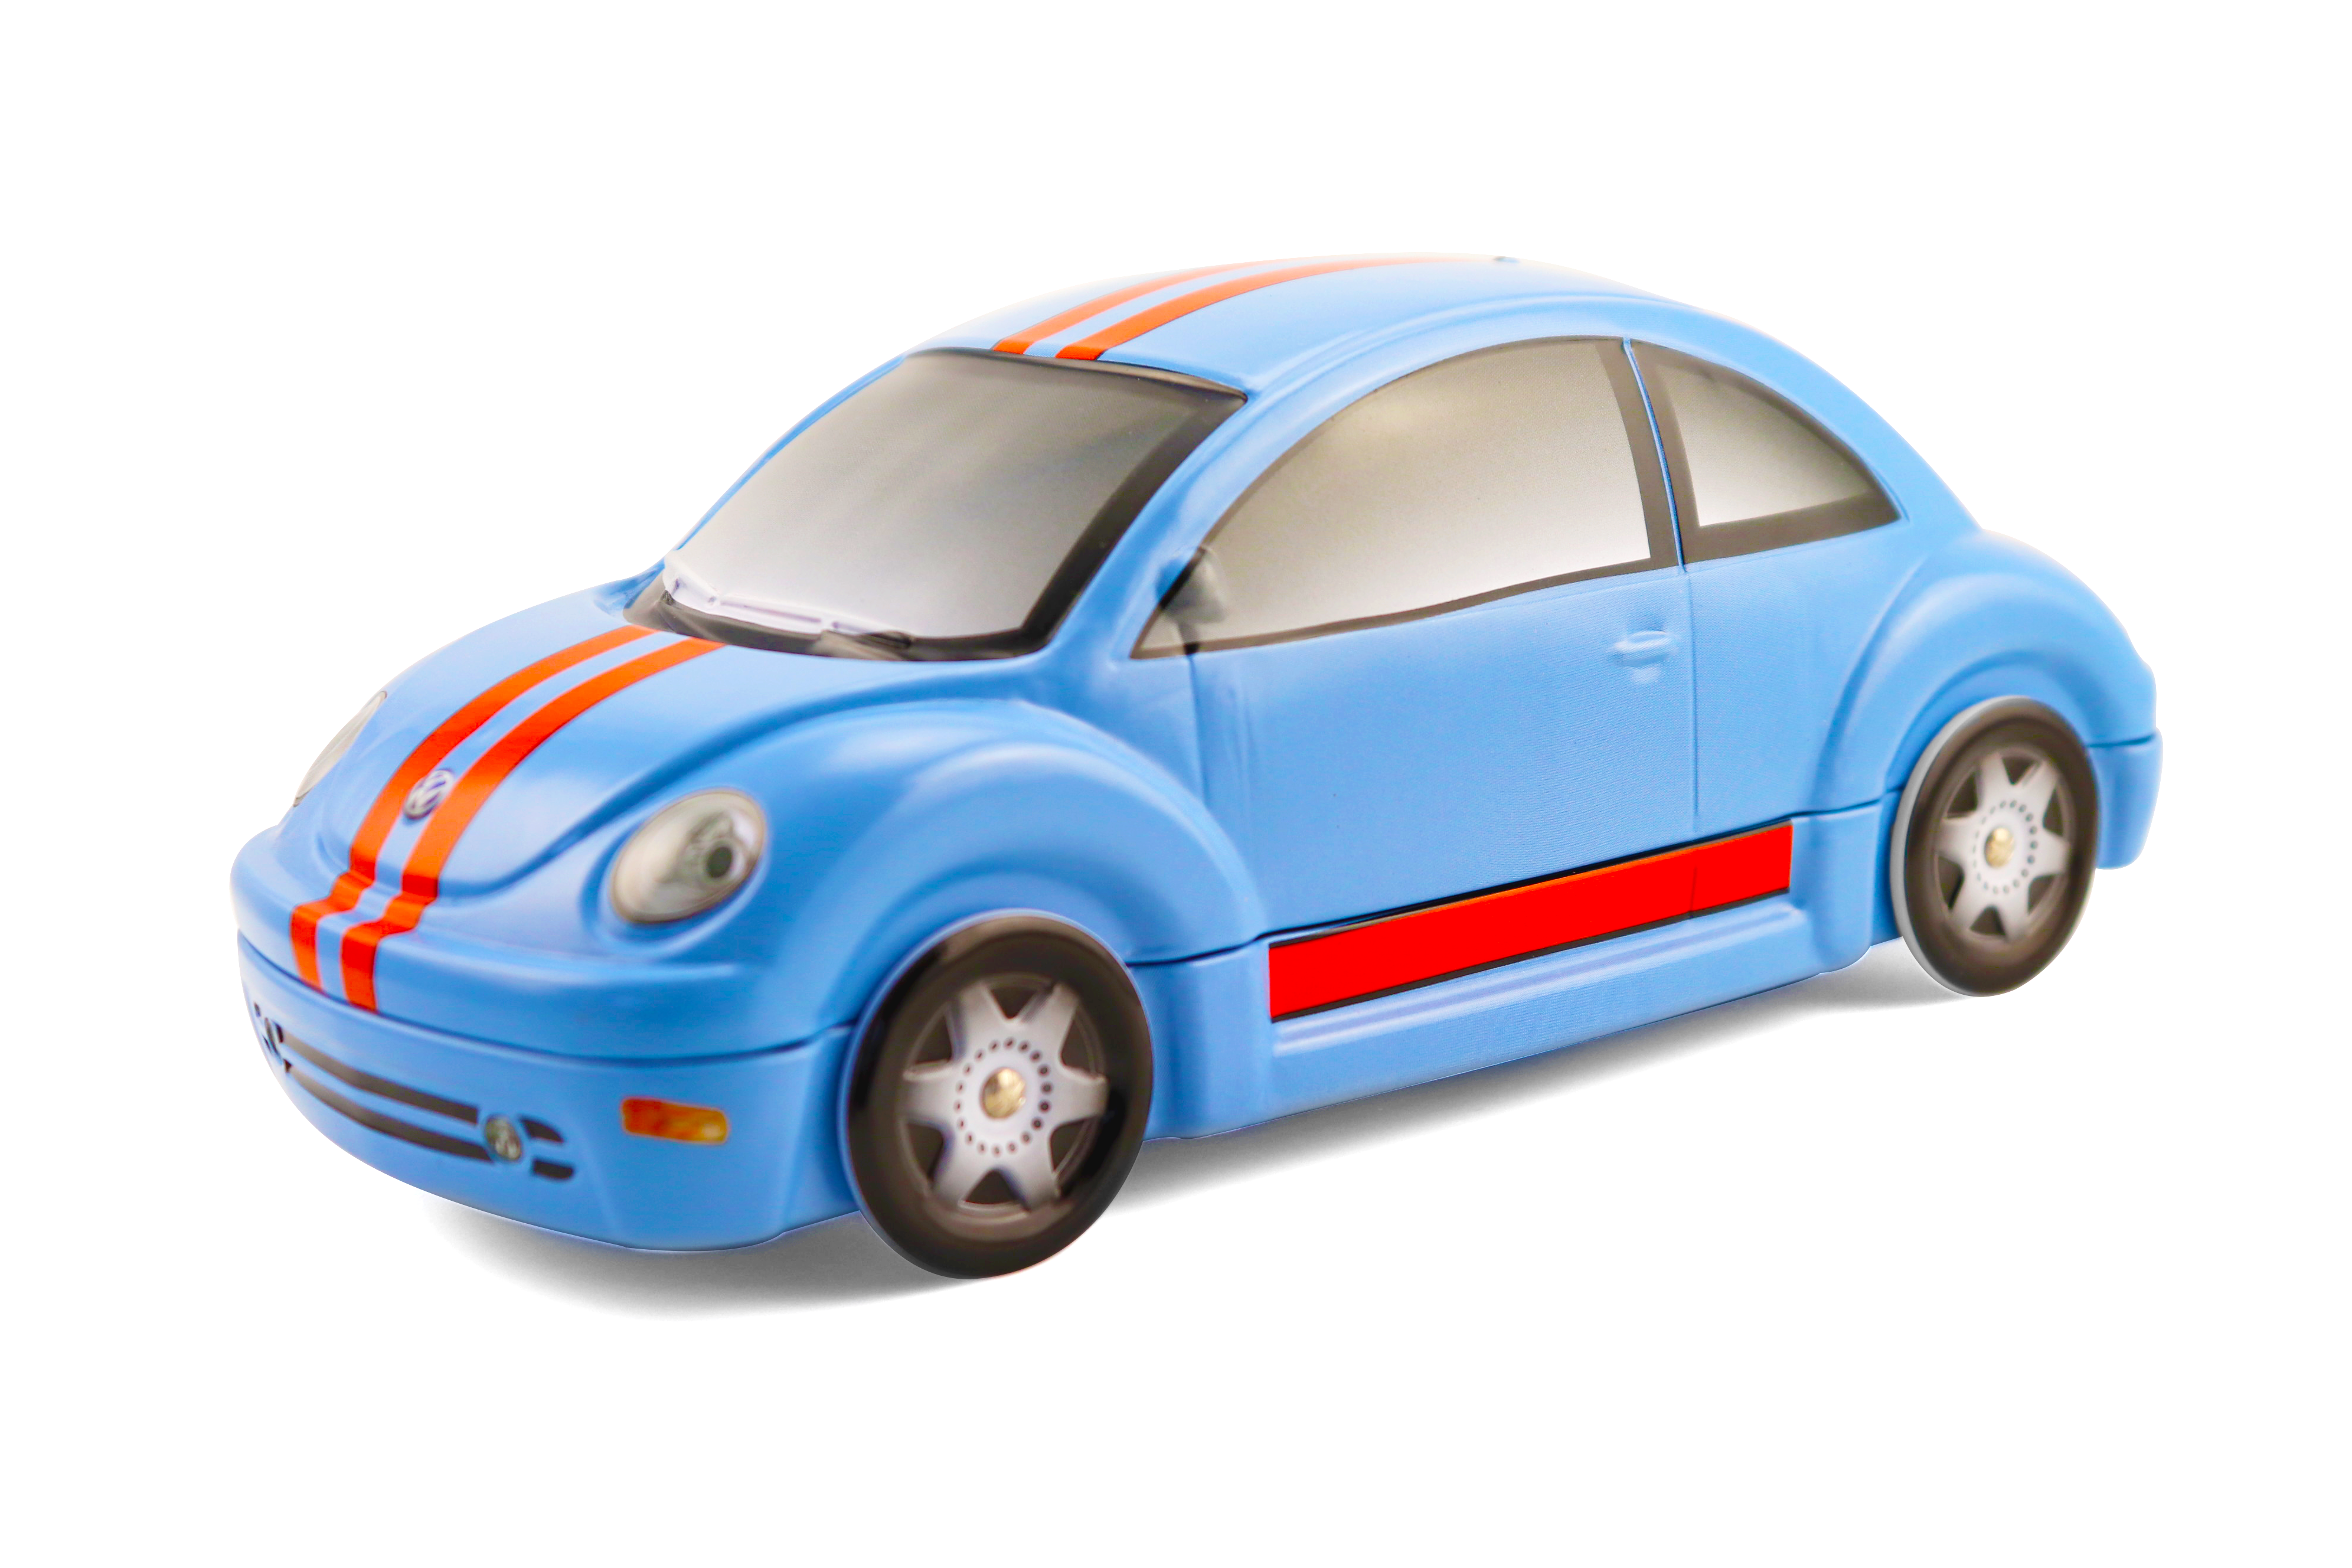 New Beetle VW - Course bleu - CHRISTIAN DELORME S.A.S. - Design packaging